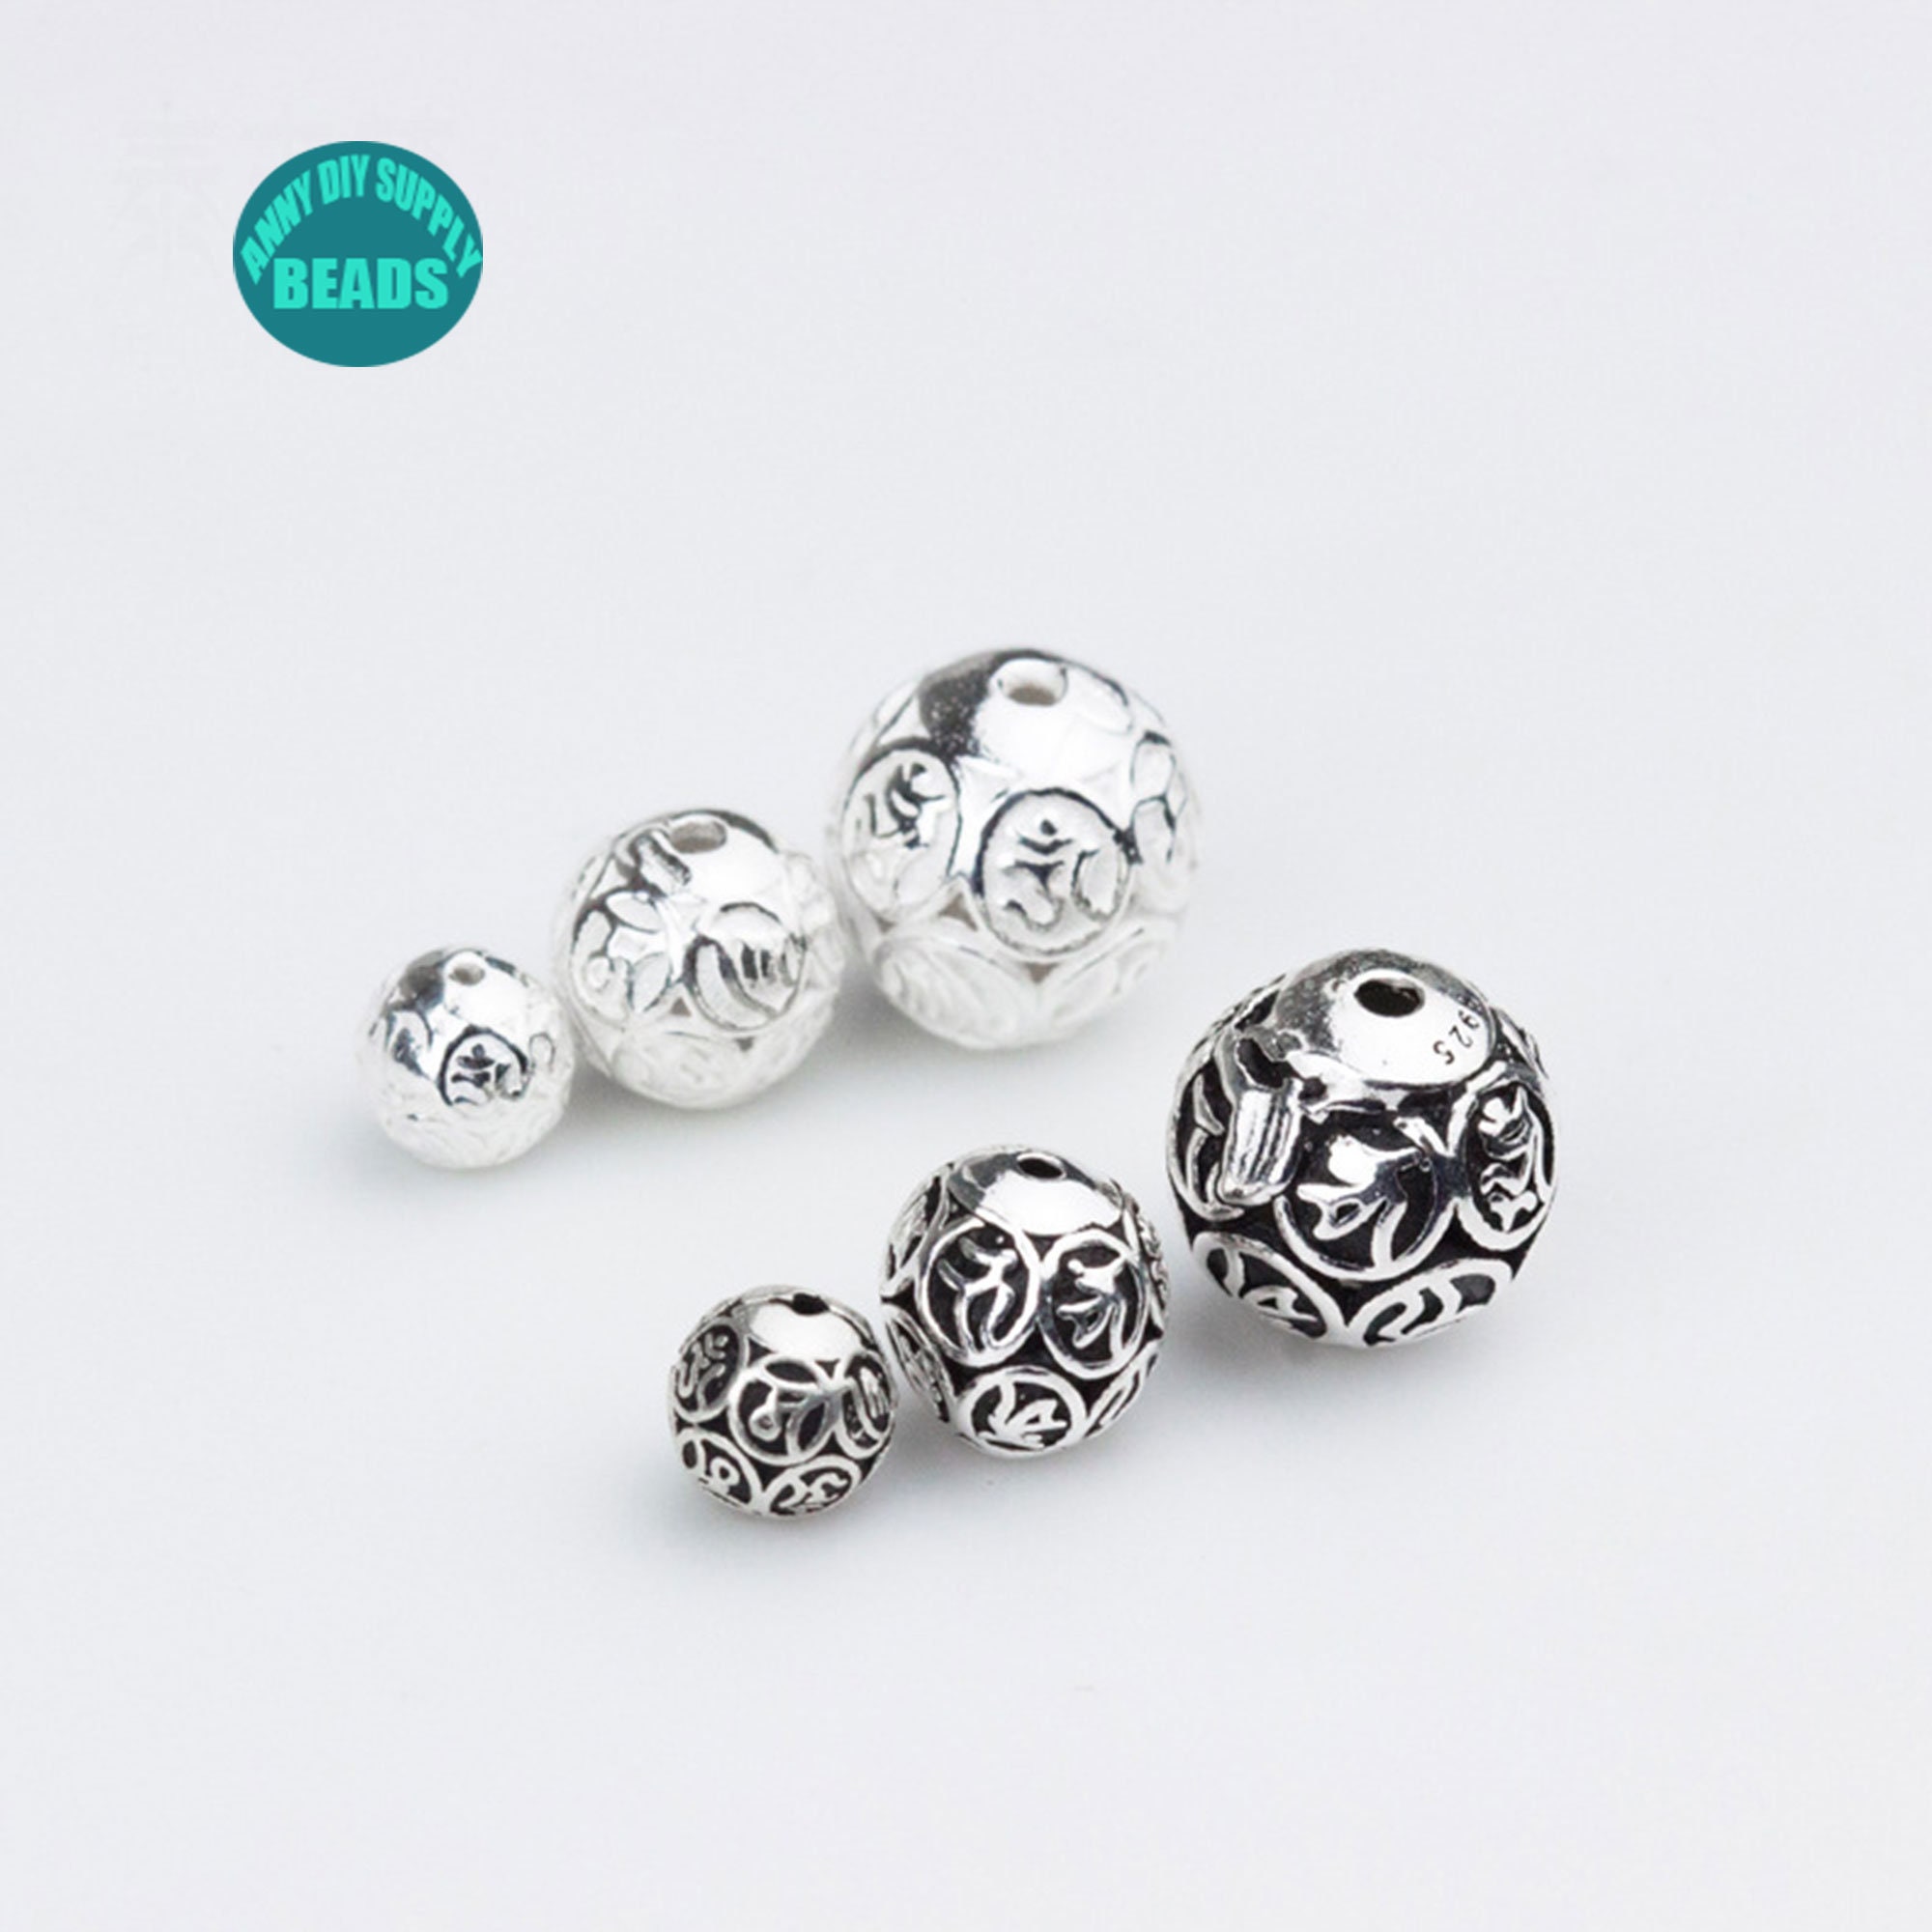 10mm 8pc Round Silver Beads for Jewelry Making, Brushed Silver Spacer  Beads, Metal Ball Beads 